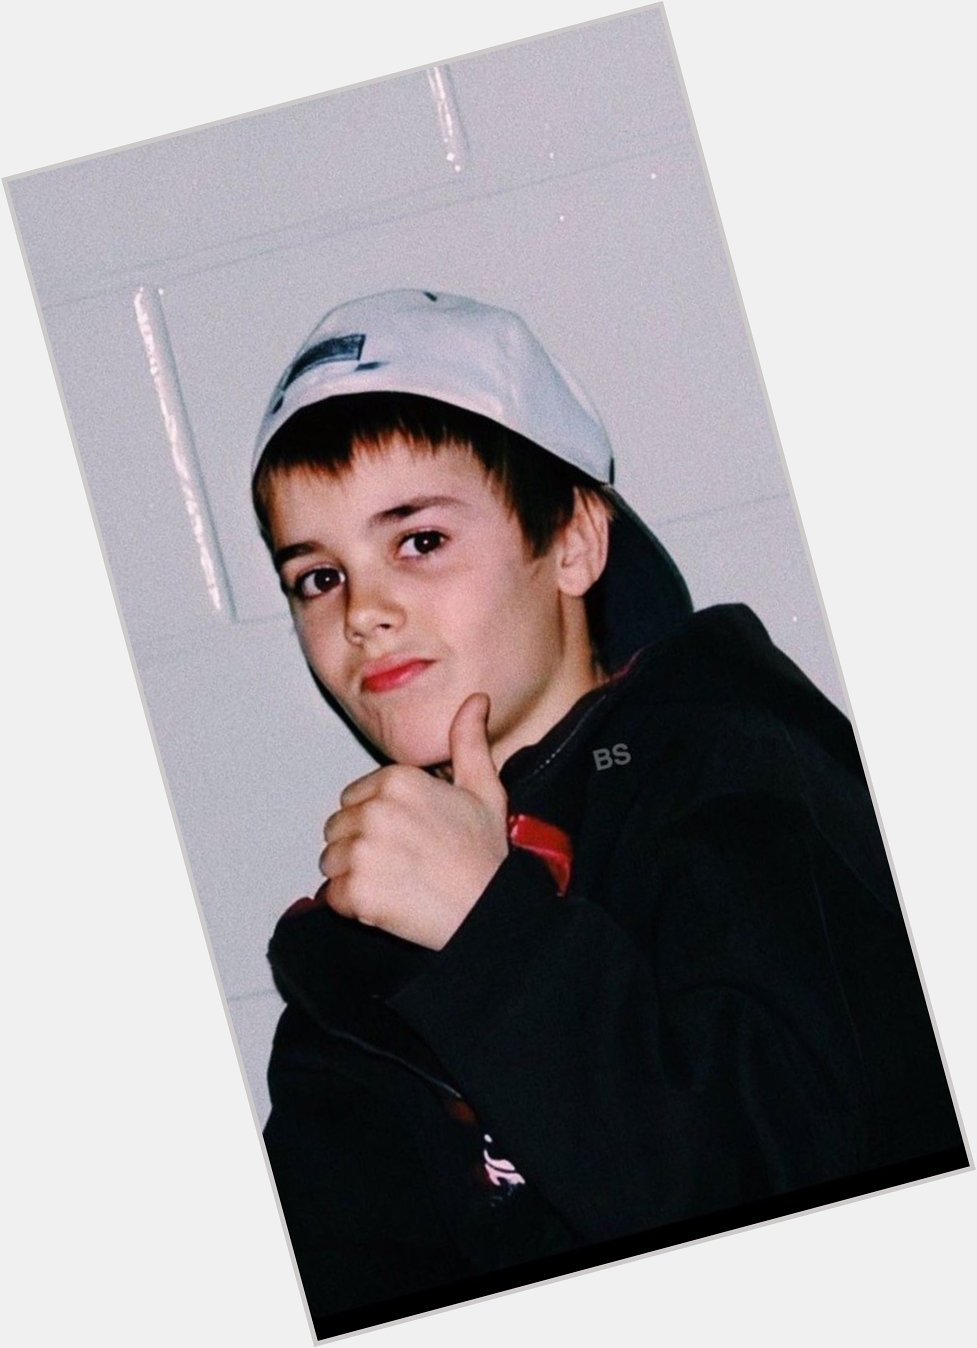 Growing up so fast but forever my sweet boy happy birthday justin bieber!!!!!! 